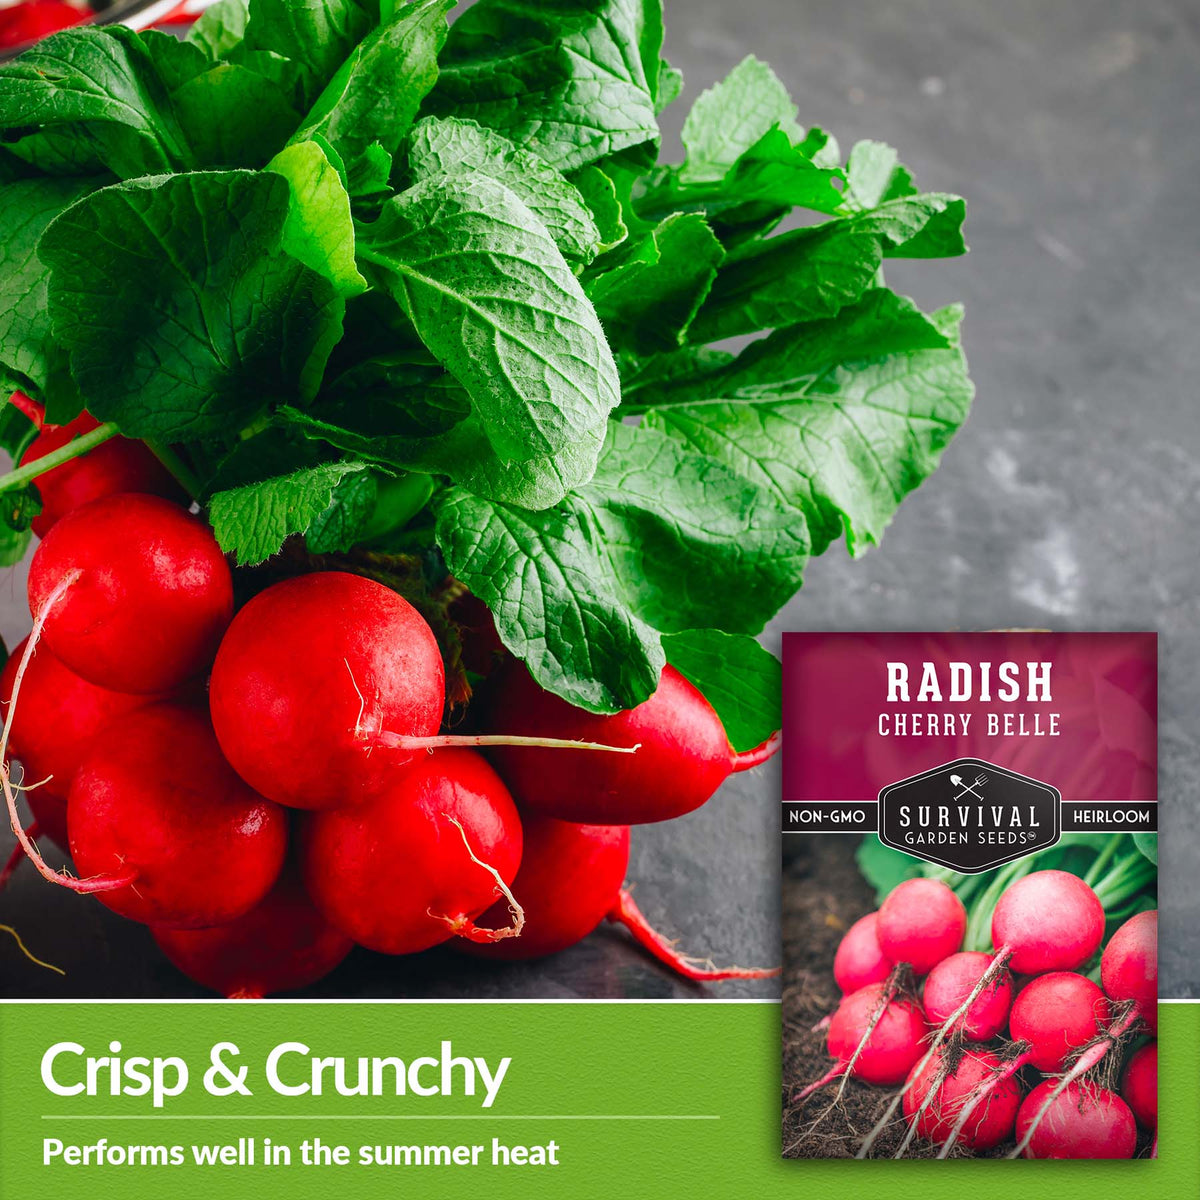 Cherry Belle Radish is crisp and crunch and performs well in summer heat